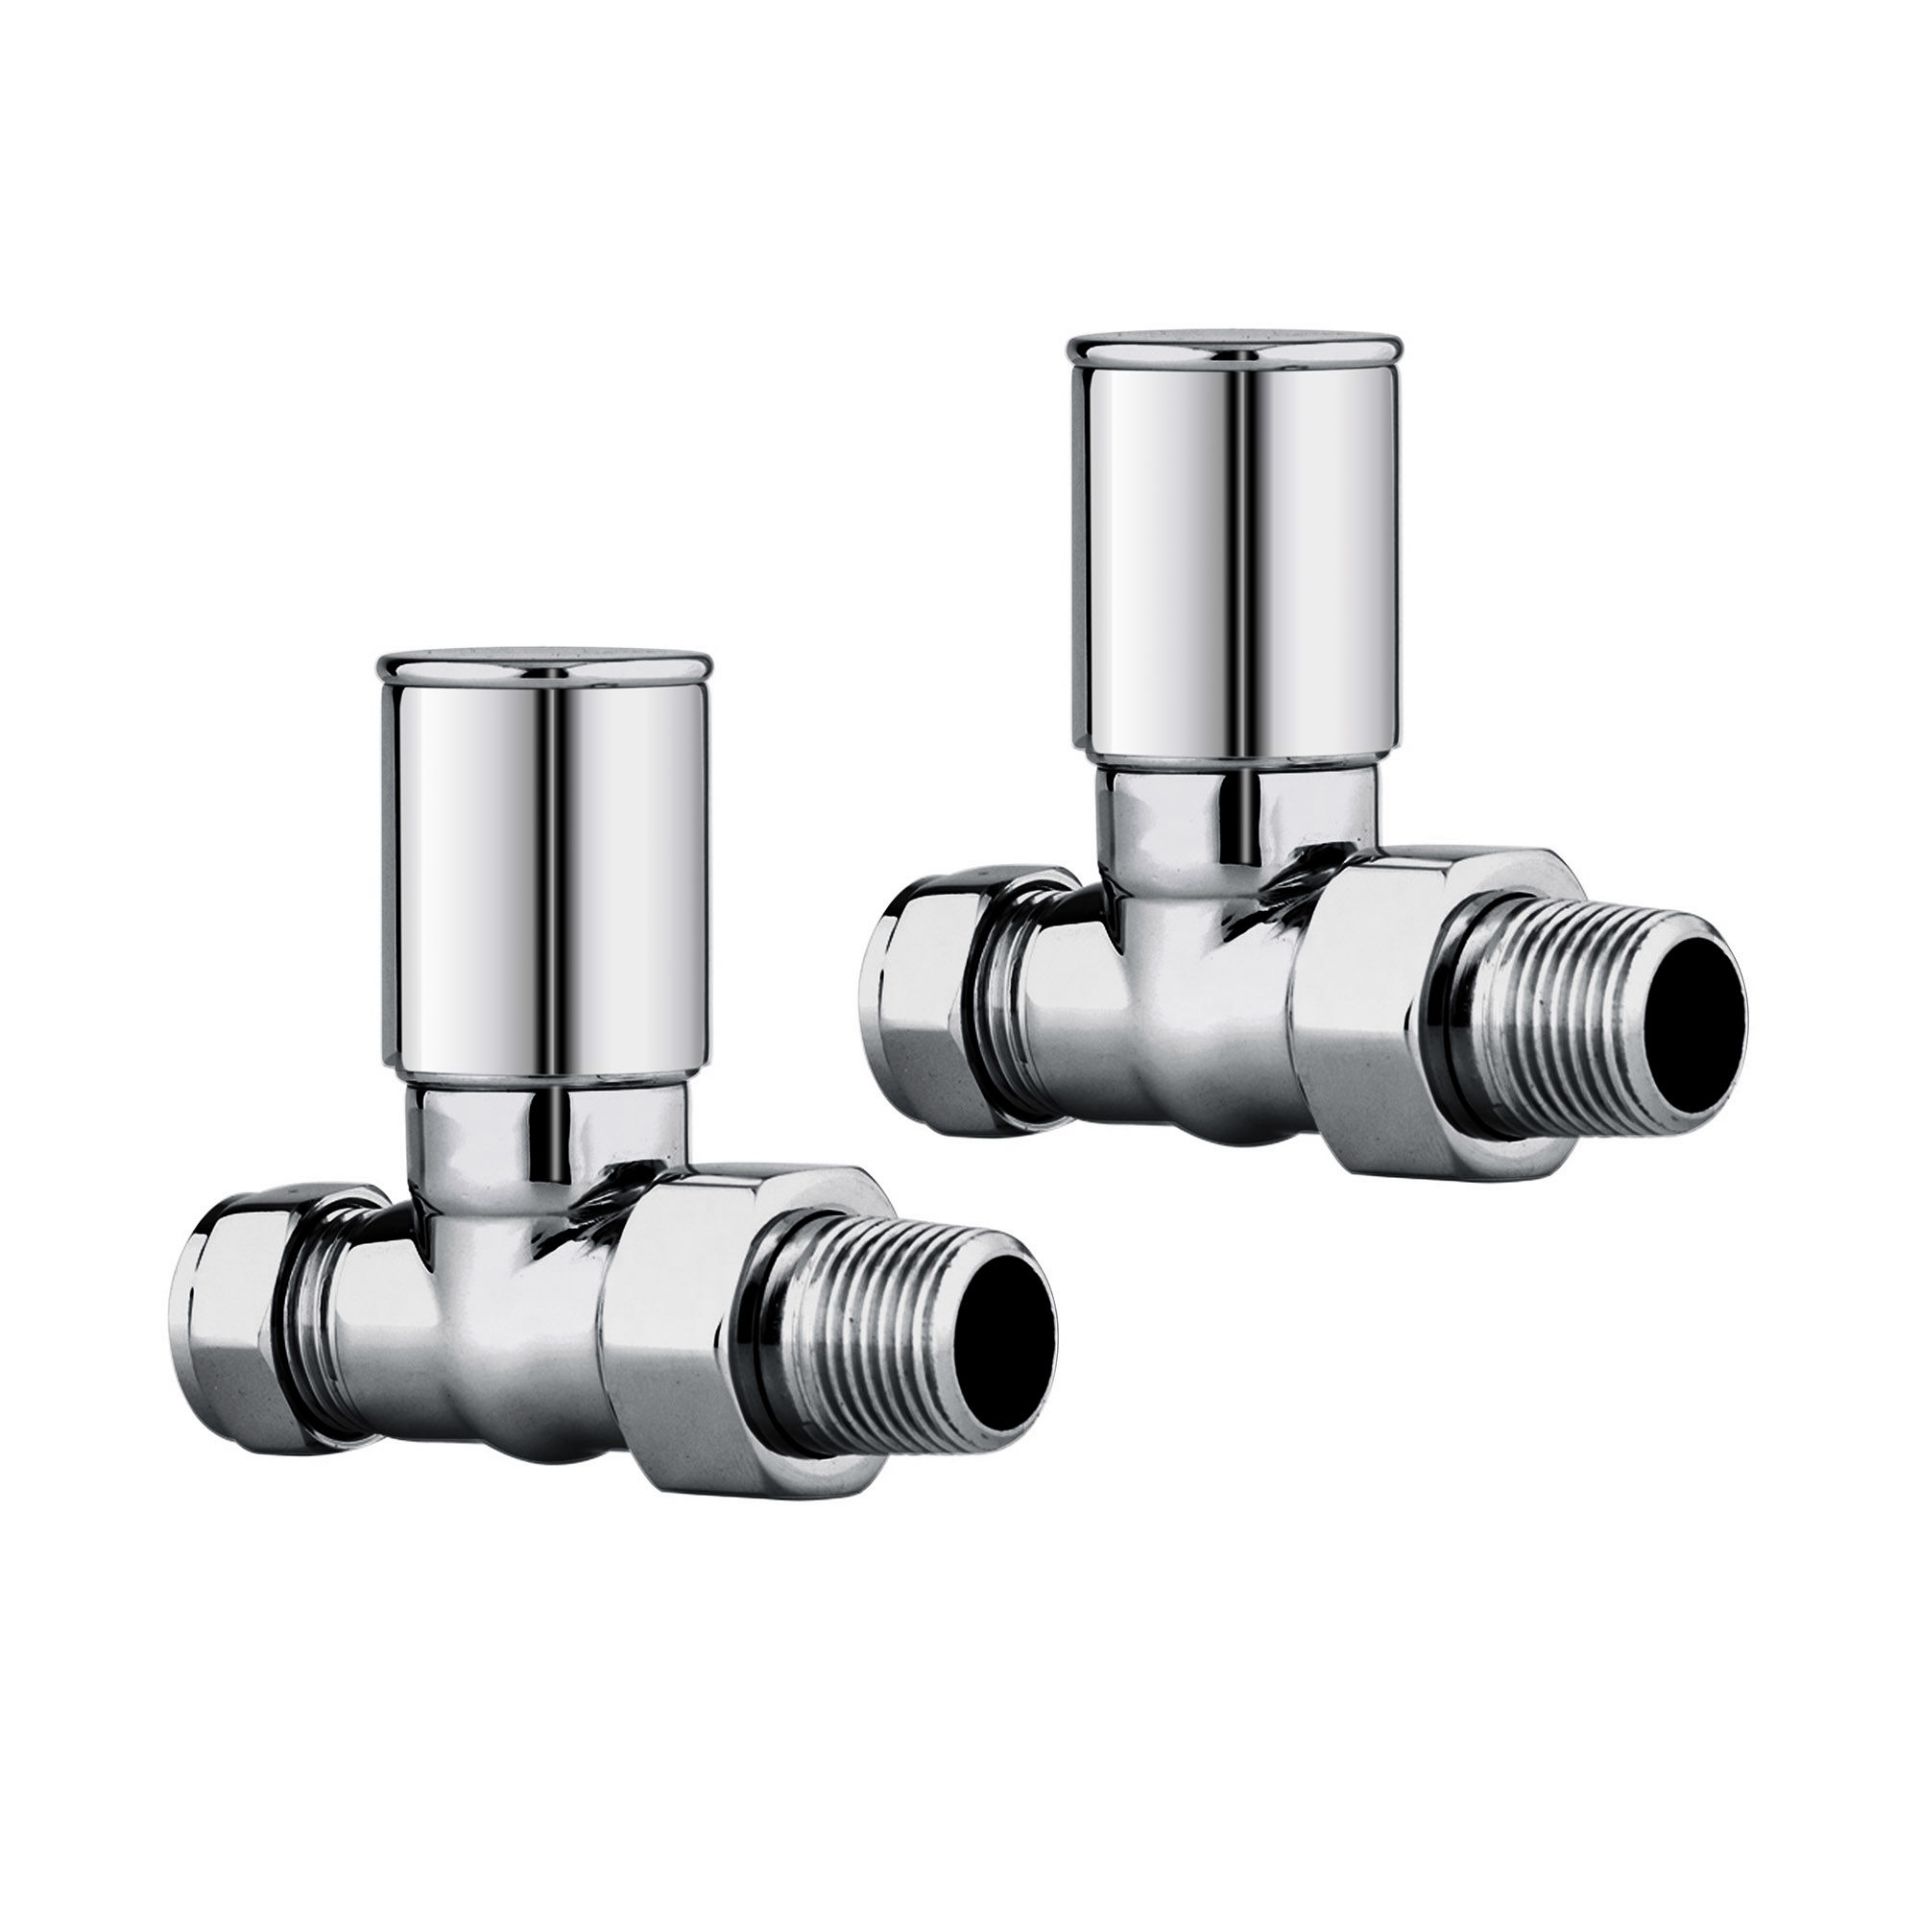 (MP4) 15mm Standard Connection Straight Radiator Valves - Heavy Duty Polished Chrome Plated Brass